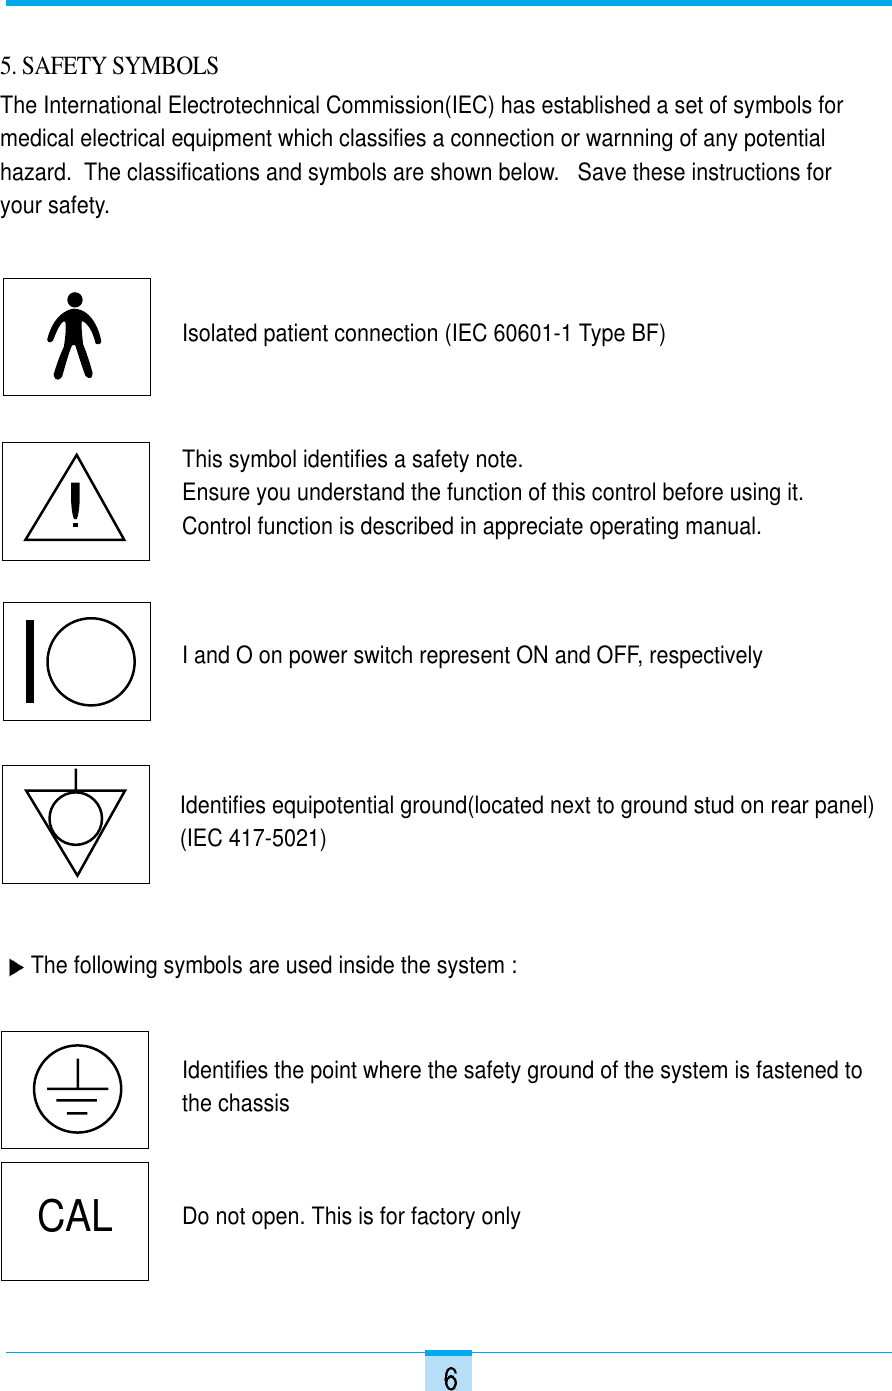 The following symbols are used inside the system : Isolated patient connection (IEC 60601-1 Type BF)This symbol identifies a safety note. Ensure you understand the function of this control before using it. Control function is described in appreciate operating manual.I and O on power switch represent ON and OFF, respectivelyIdentifies equipotential ground(located next to ground stud on rear panel)(IEC 417-5021)Identifies the point where the safety ground of the system is fastened tothe chassisDo not open. This is for factory onlyCAL5. SAFETY SYMBOLSThe International Electrotechnical Commission(IEC) has established a set of symbols formedical electrical equipment which classifies a connection or warnning of any potentialhazard.  The classifications and symbols are shown below.   Save these instructions for your safety.